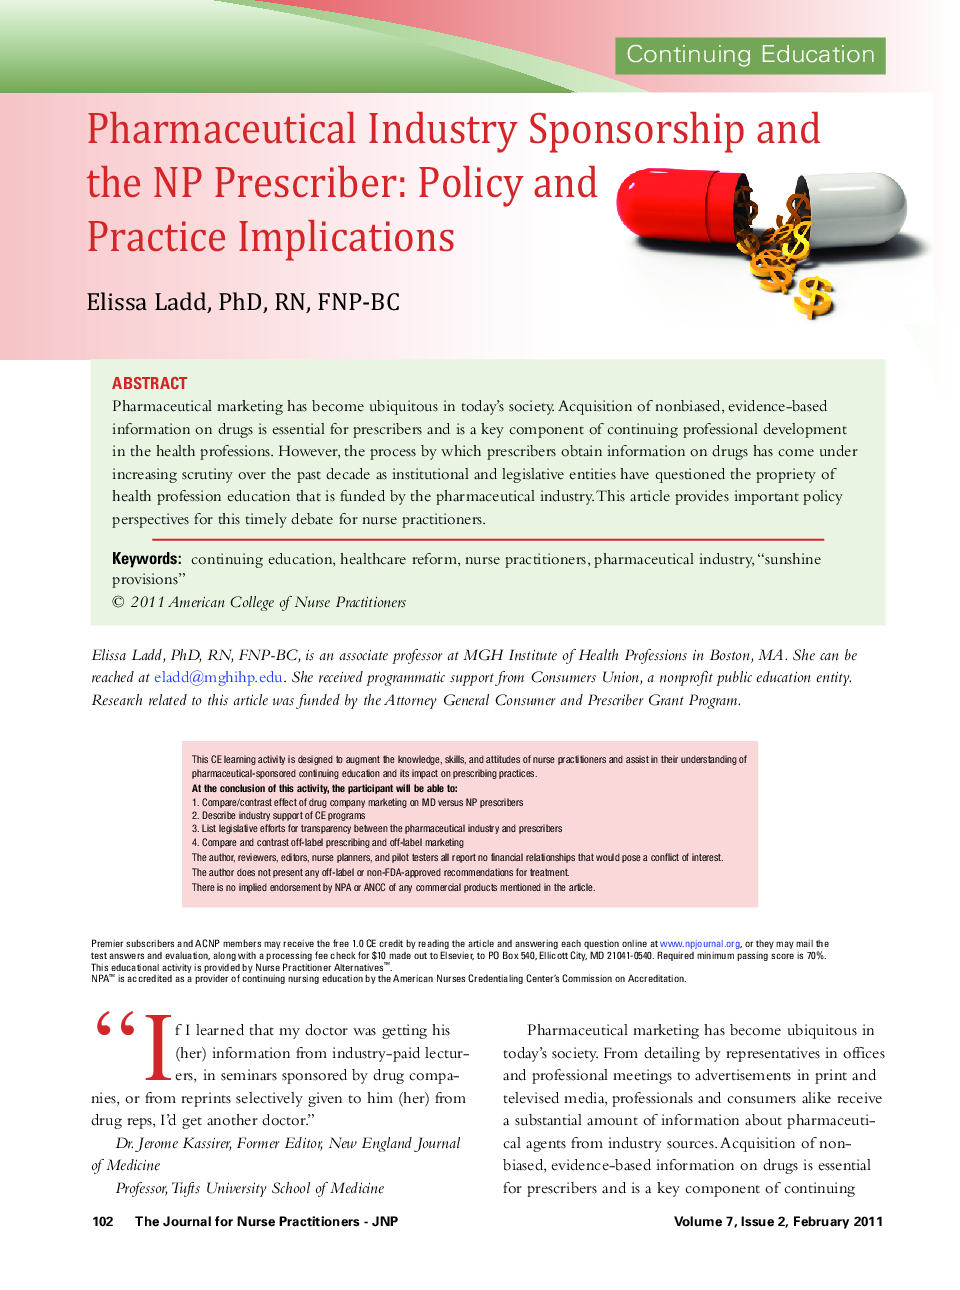 Pharmaceutical Industry Sponsorship and the NP Prescriber: Policy and Practice Implications 